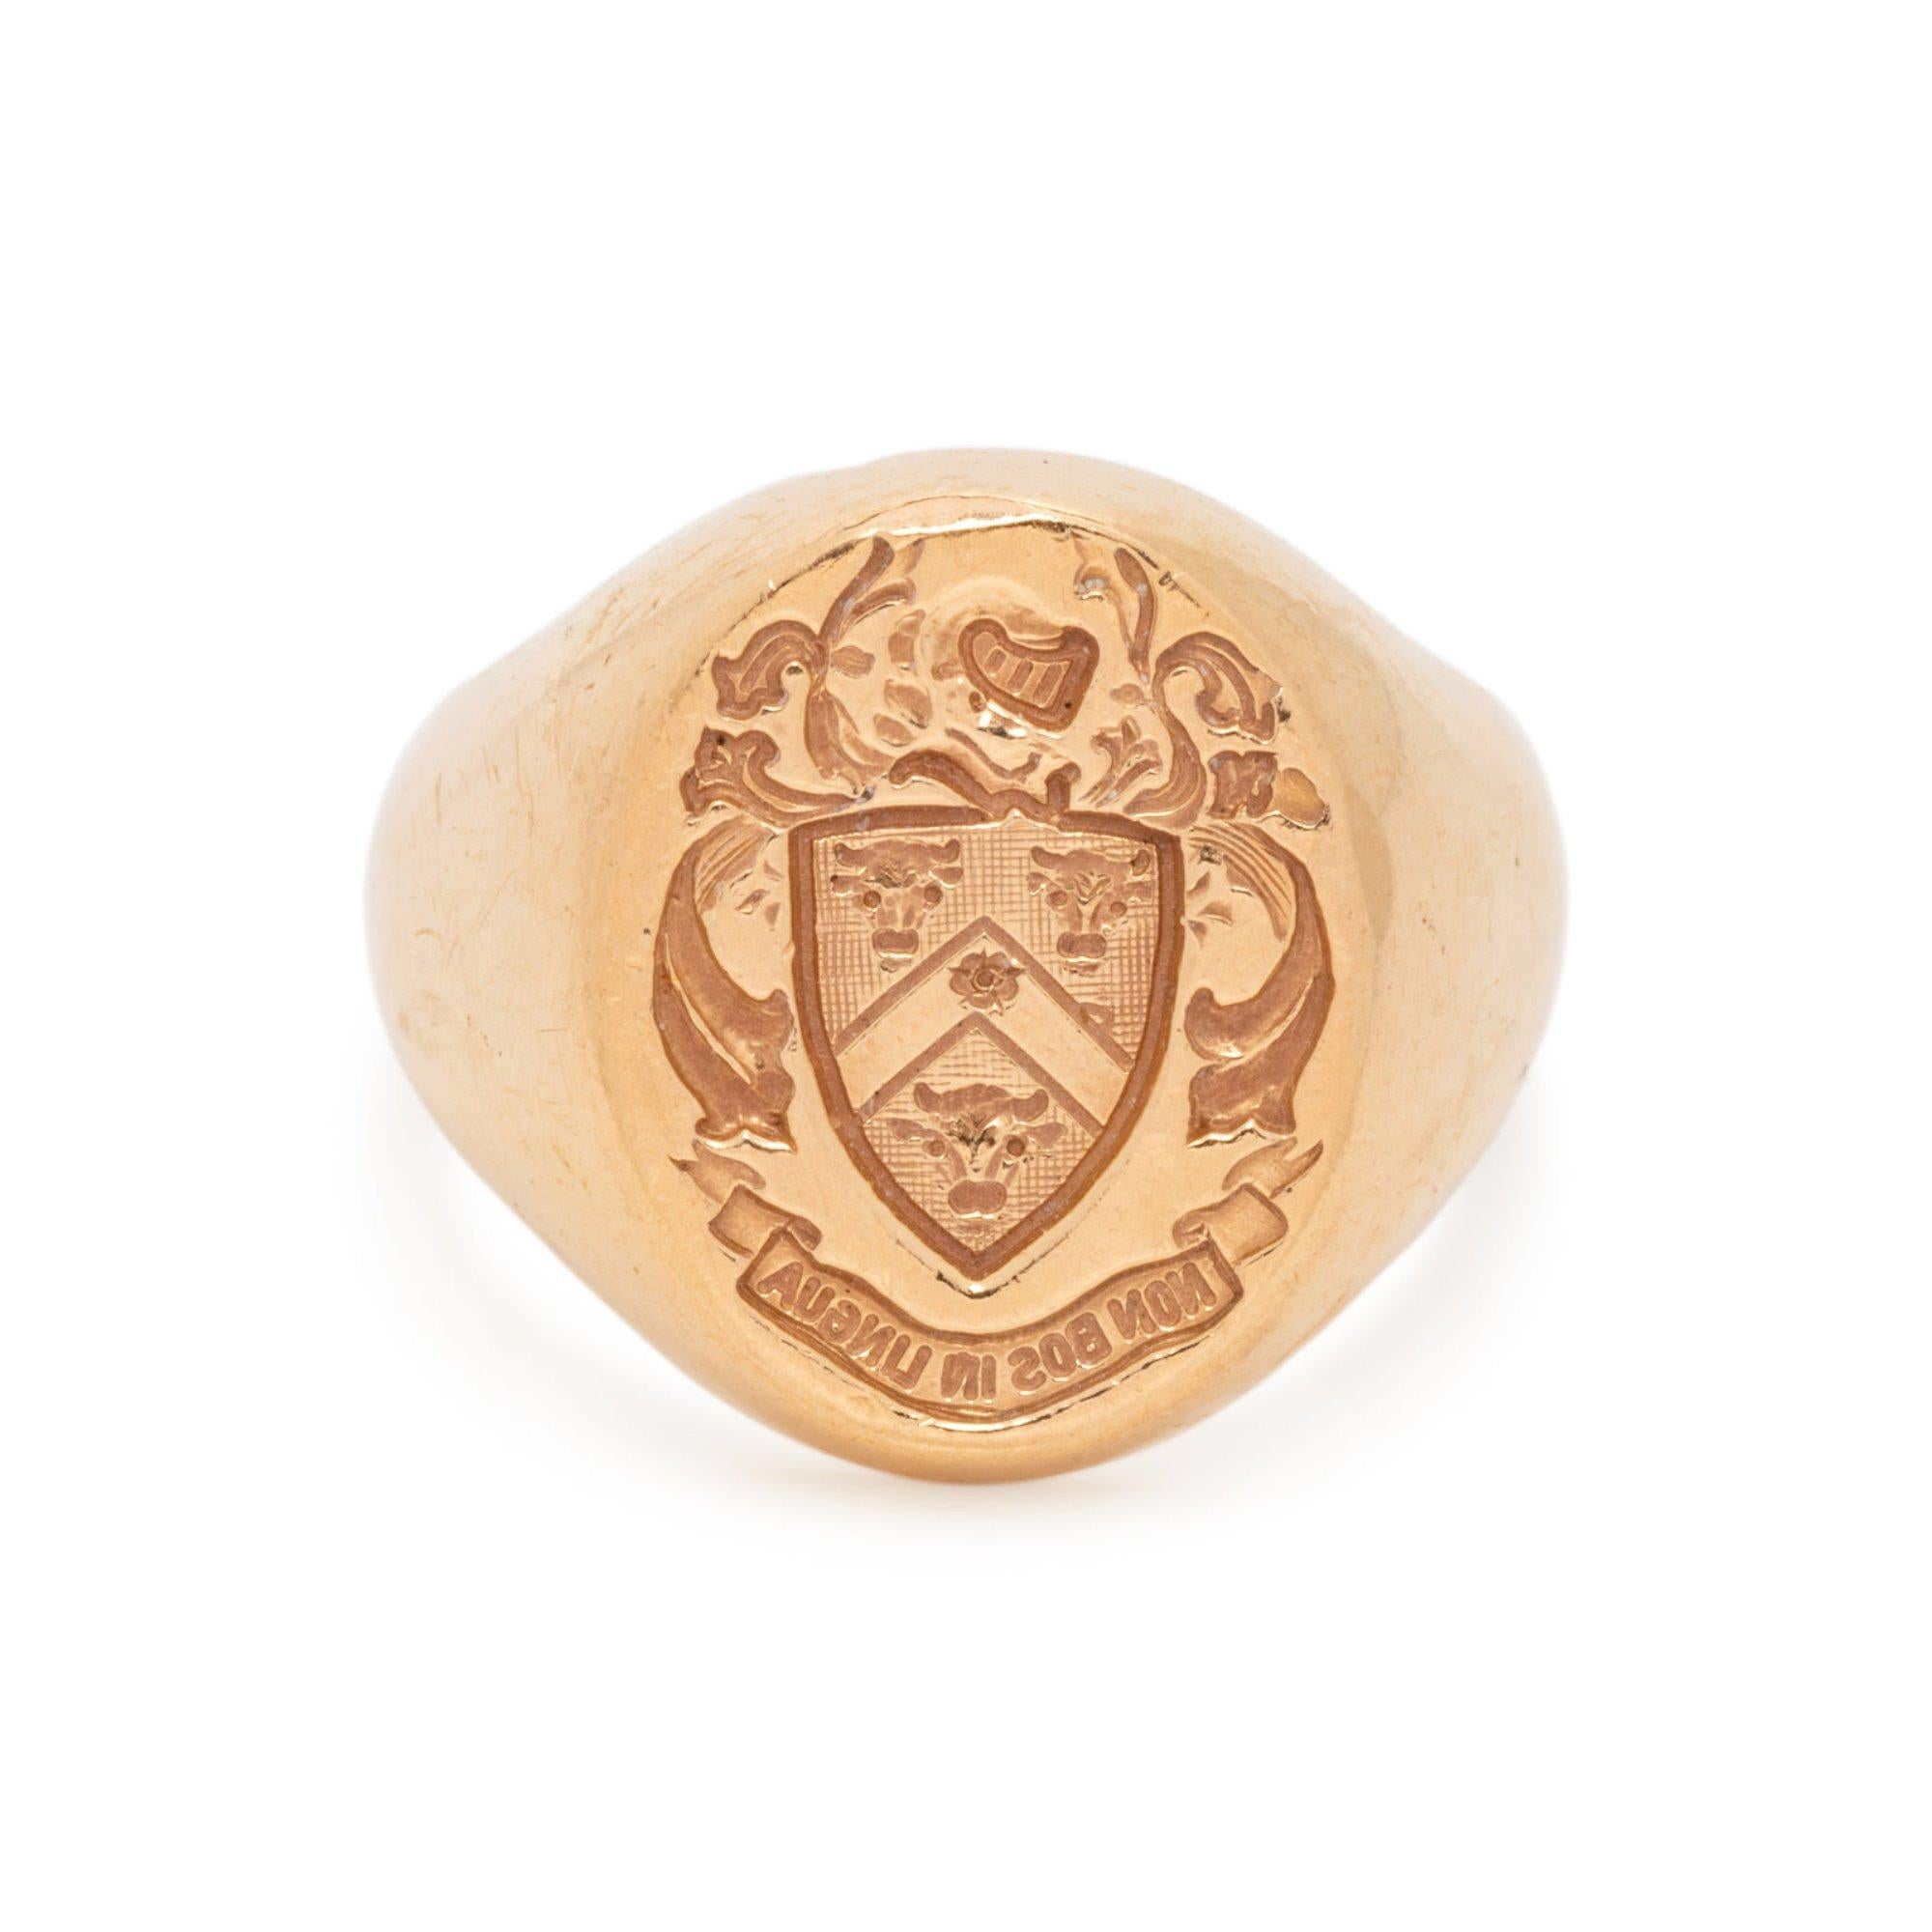 Antique Men’s Signet Ring with Crest of Bulls 14K Yellow Gold Makers Marks 23g In Good Condition For Sale In Woodland Hills, CA